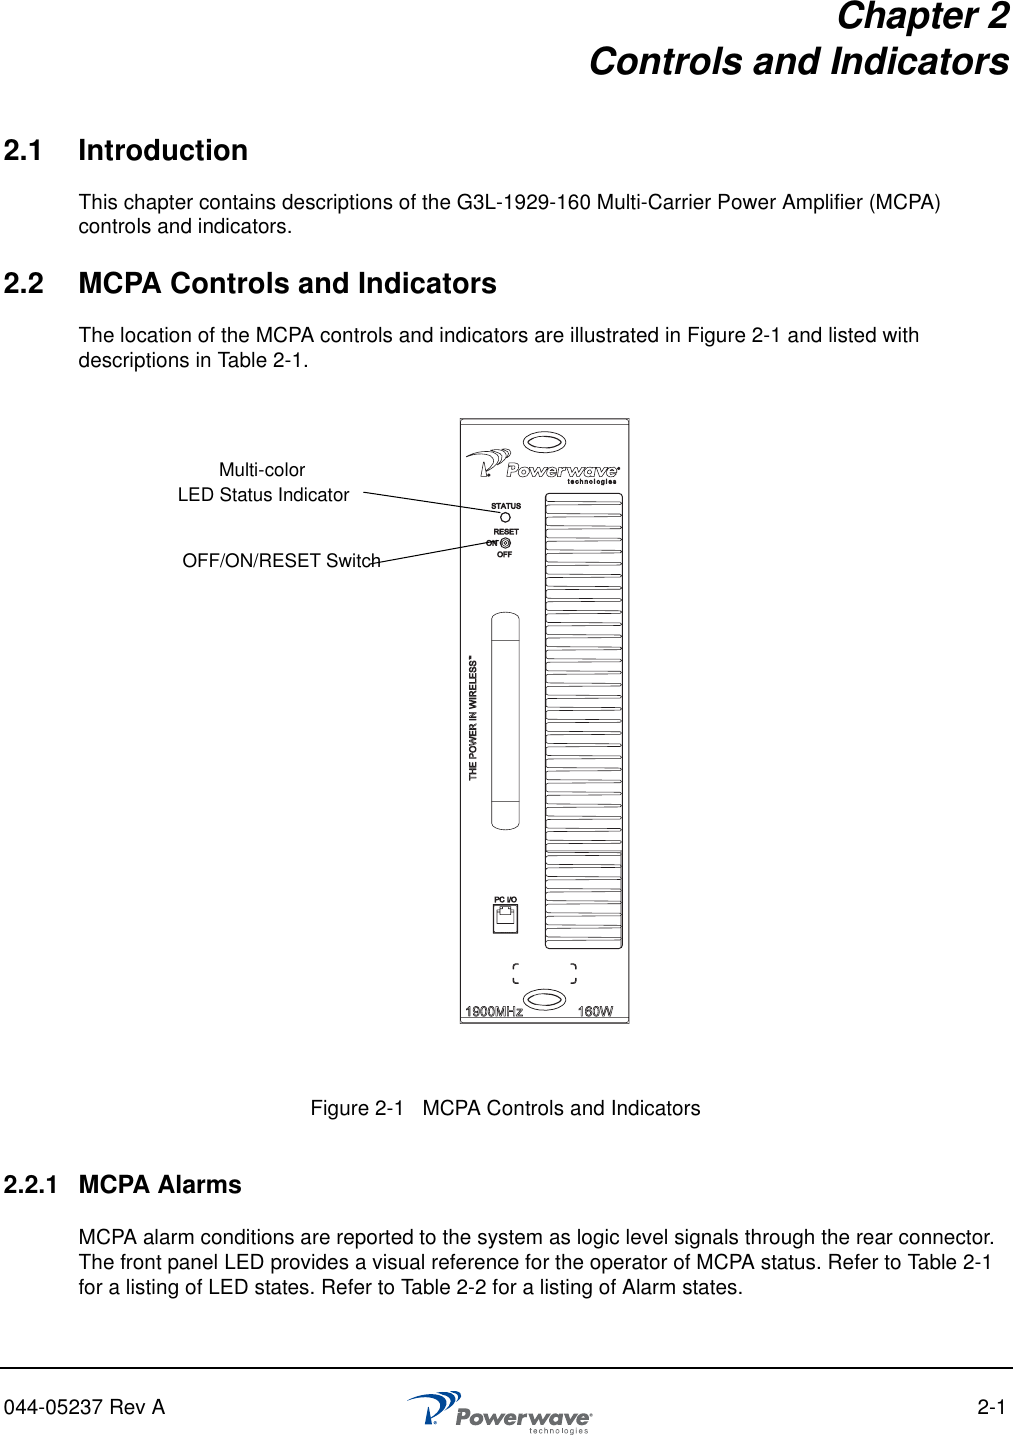 044-05237 Rev A 2-1Chapter 2Controls and Indicators2.1 IntroductionThis chapter contains descriptions of the G3L-1929-160 Multi-Carrier Power Amplifier (MCPA) controls and indicators.2.2 MCPA Controls and IndicatorsThe location of the MCPA controls and indicators are illustrated in Figure 2-1 and listed with descriptions in Table 2-1.2.2.1 MCPA AlarmsMCPA alarm conditions are reported to the system as logic level signals through the rear connector. The front panel LED provides a visual reference for the operator of MCPA status. Refer to Table 2-1 for a listing of LED states. Refer to Table 2-2 for a listing of Alarm states.Figure 2-1   MCPA Controls and Indicators Multi-colorOFF/ON/RESET SwitchLED Status Indicator 